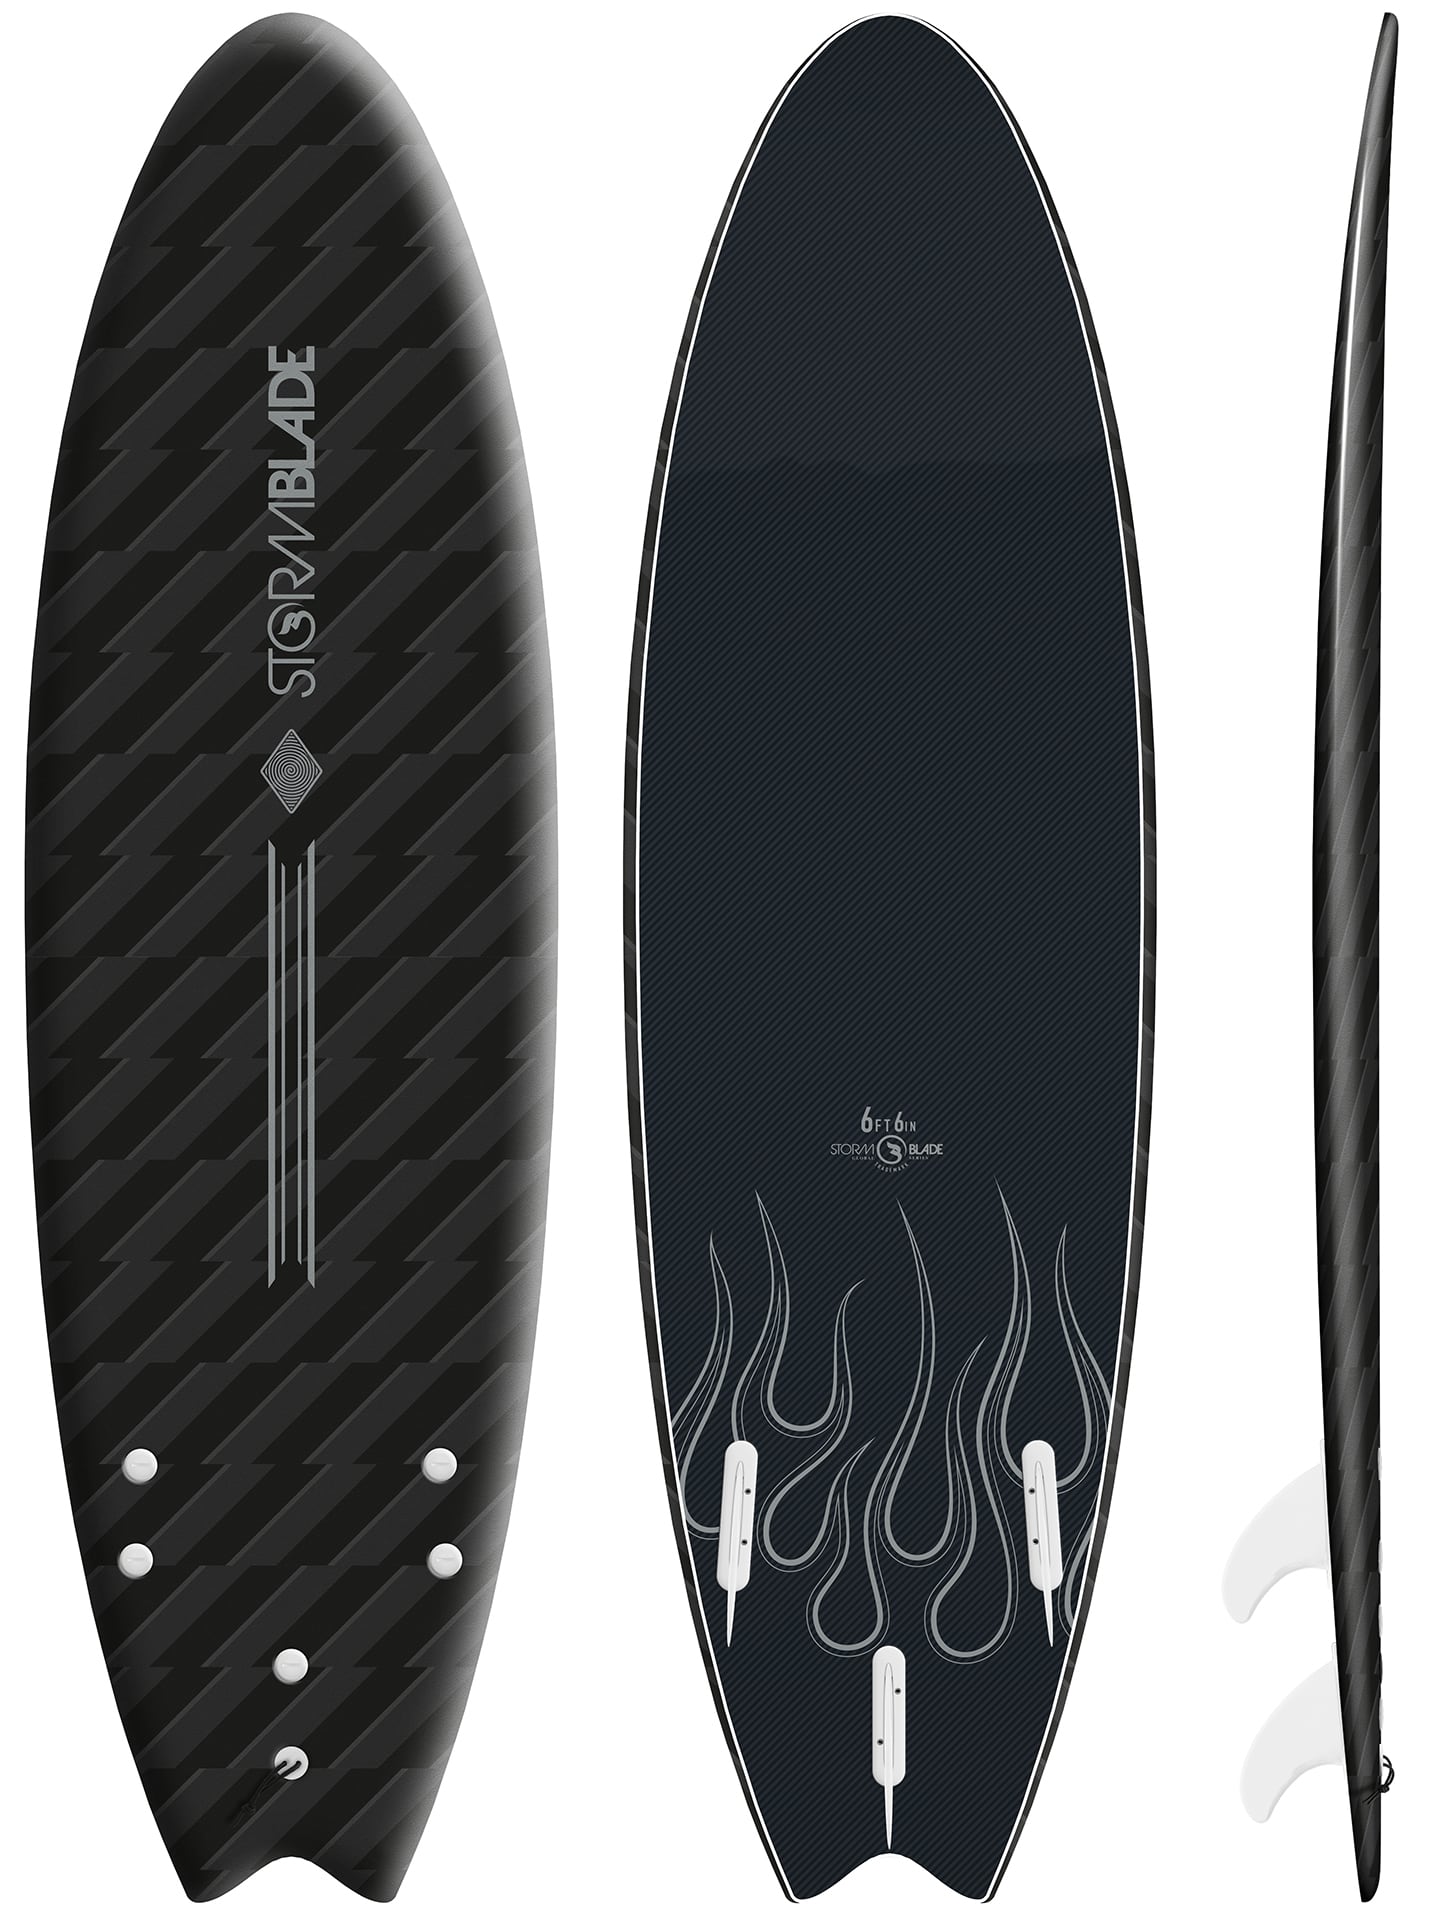 STORM BLADE SURFBOARDS JAPAN | 6ft6 SWALLOW TAIL SURFBOARDS